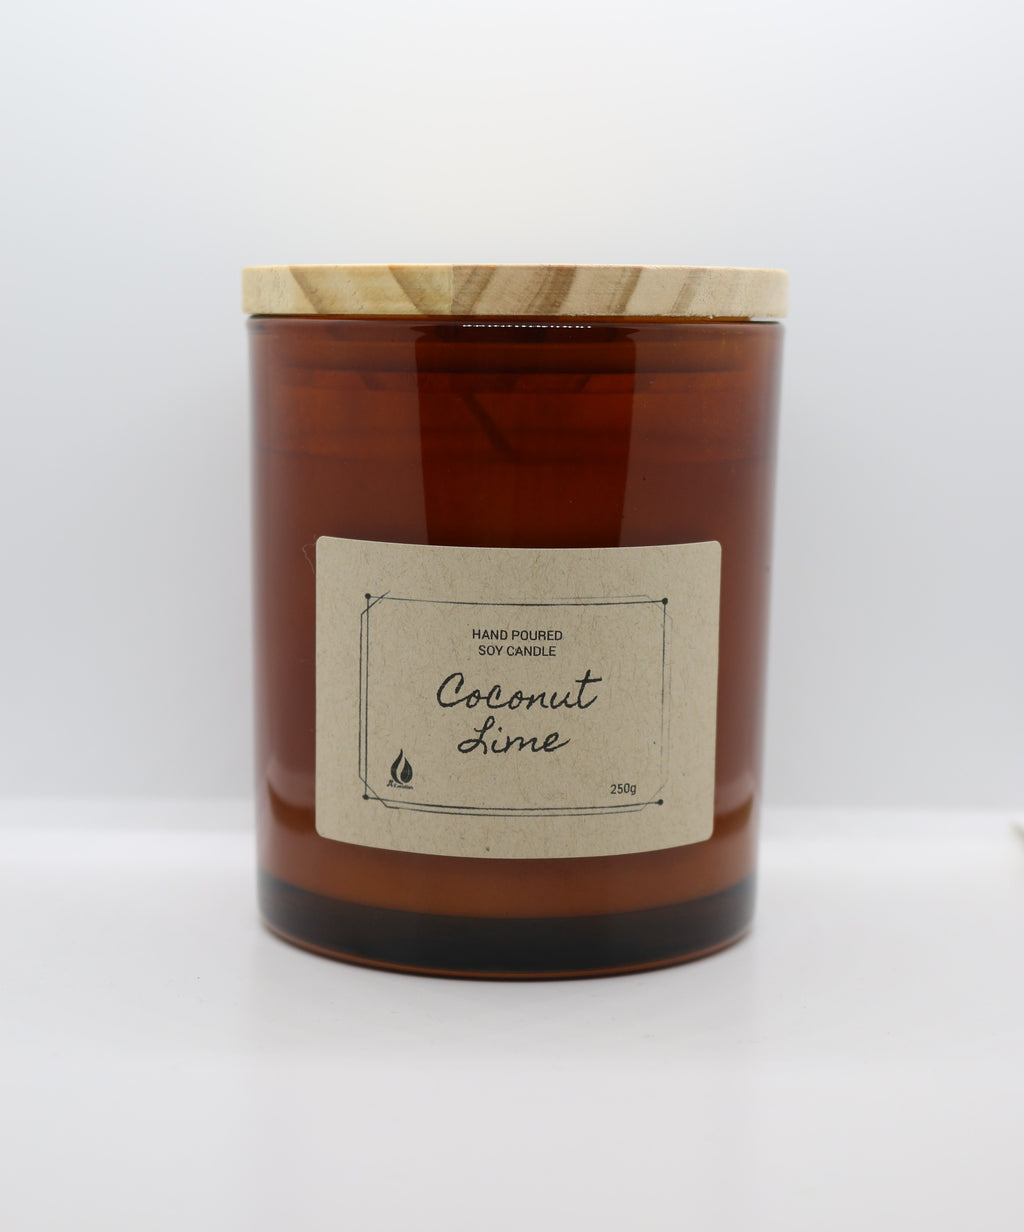 COCONUT LIME - Hand Poured Soy Candle A+ Essentials Pty Ltd